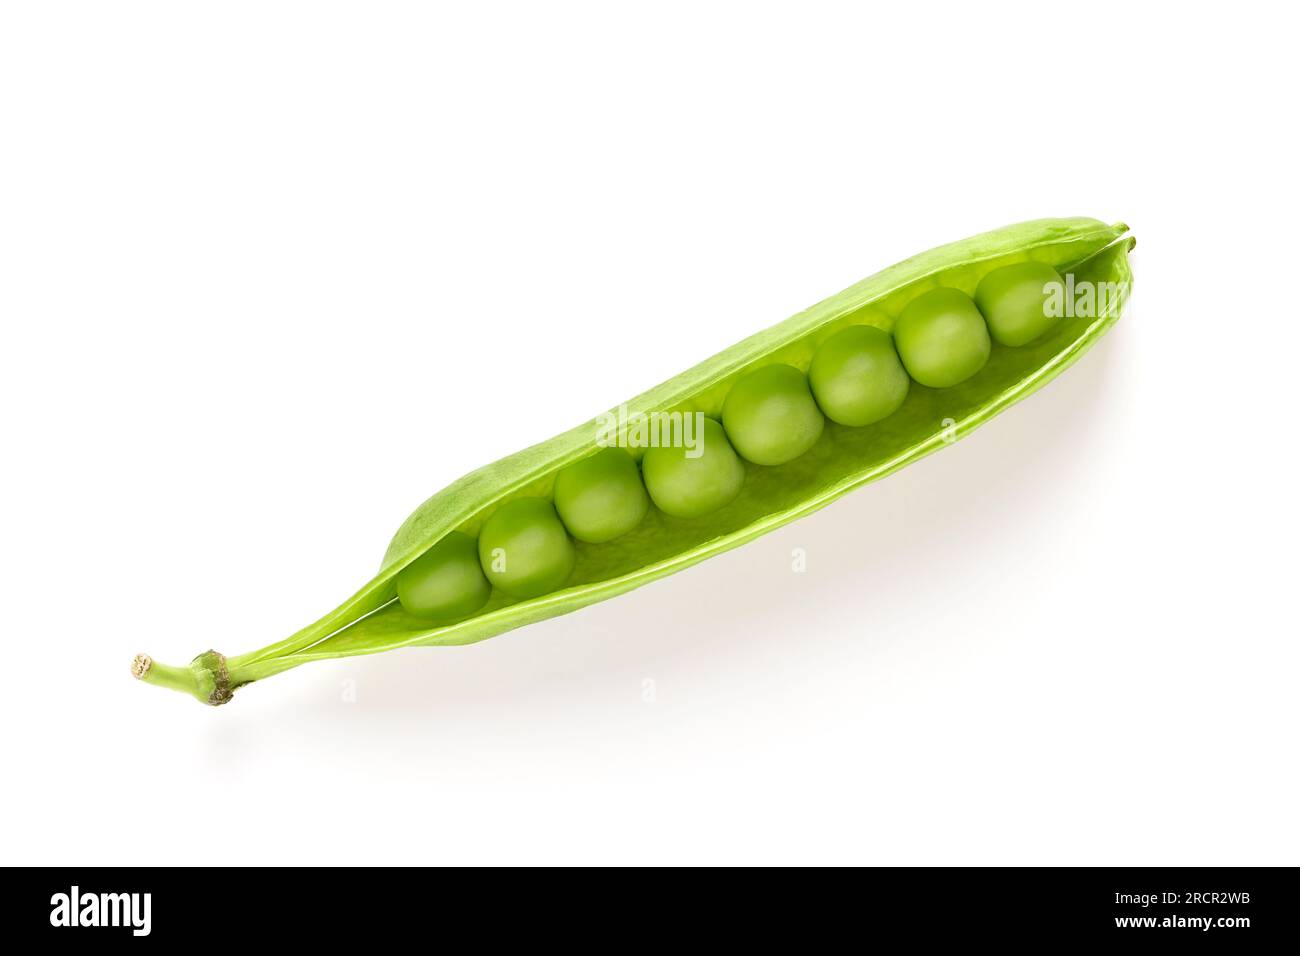 Green peas, open pod, from above. Insight into an open fresh pea pod, with ripe, raw, green fruits, seeds of Pisum sativum, a flowering annual plant. Stock Photo